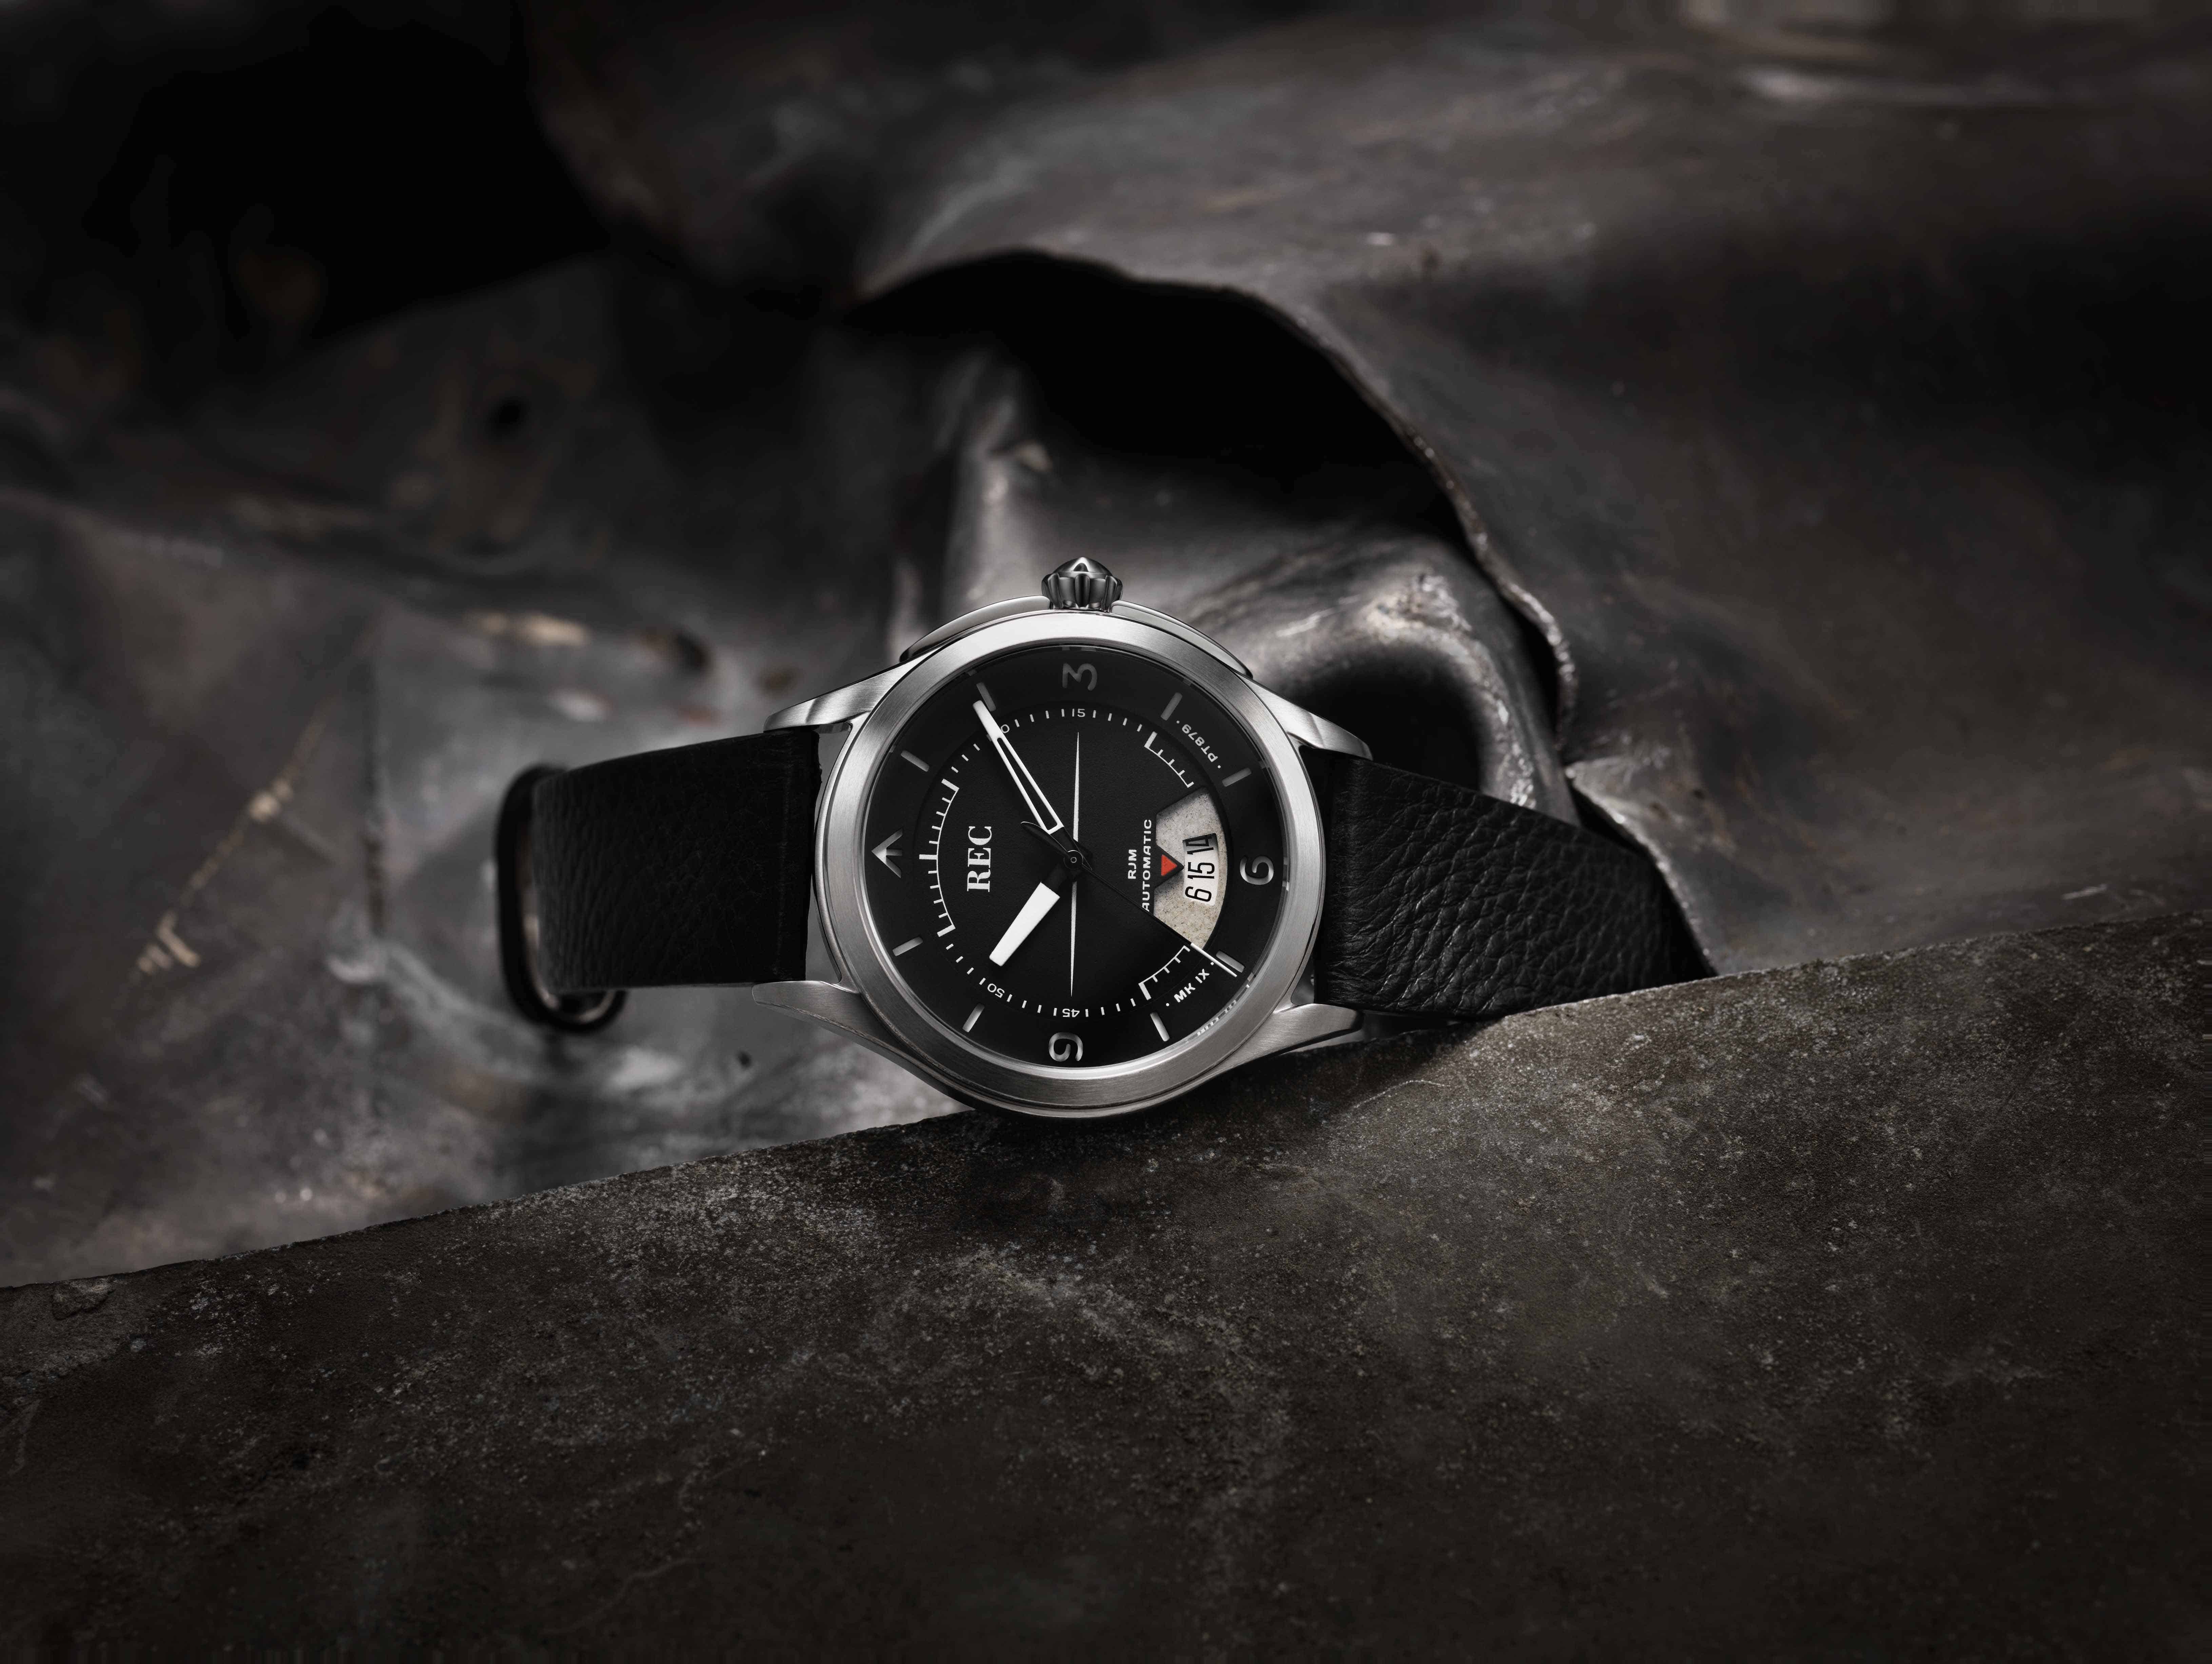 Introducing the REC RJM Limited Edition Spitfire